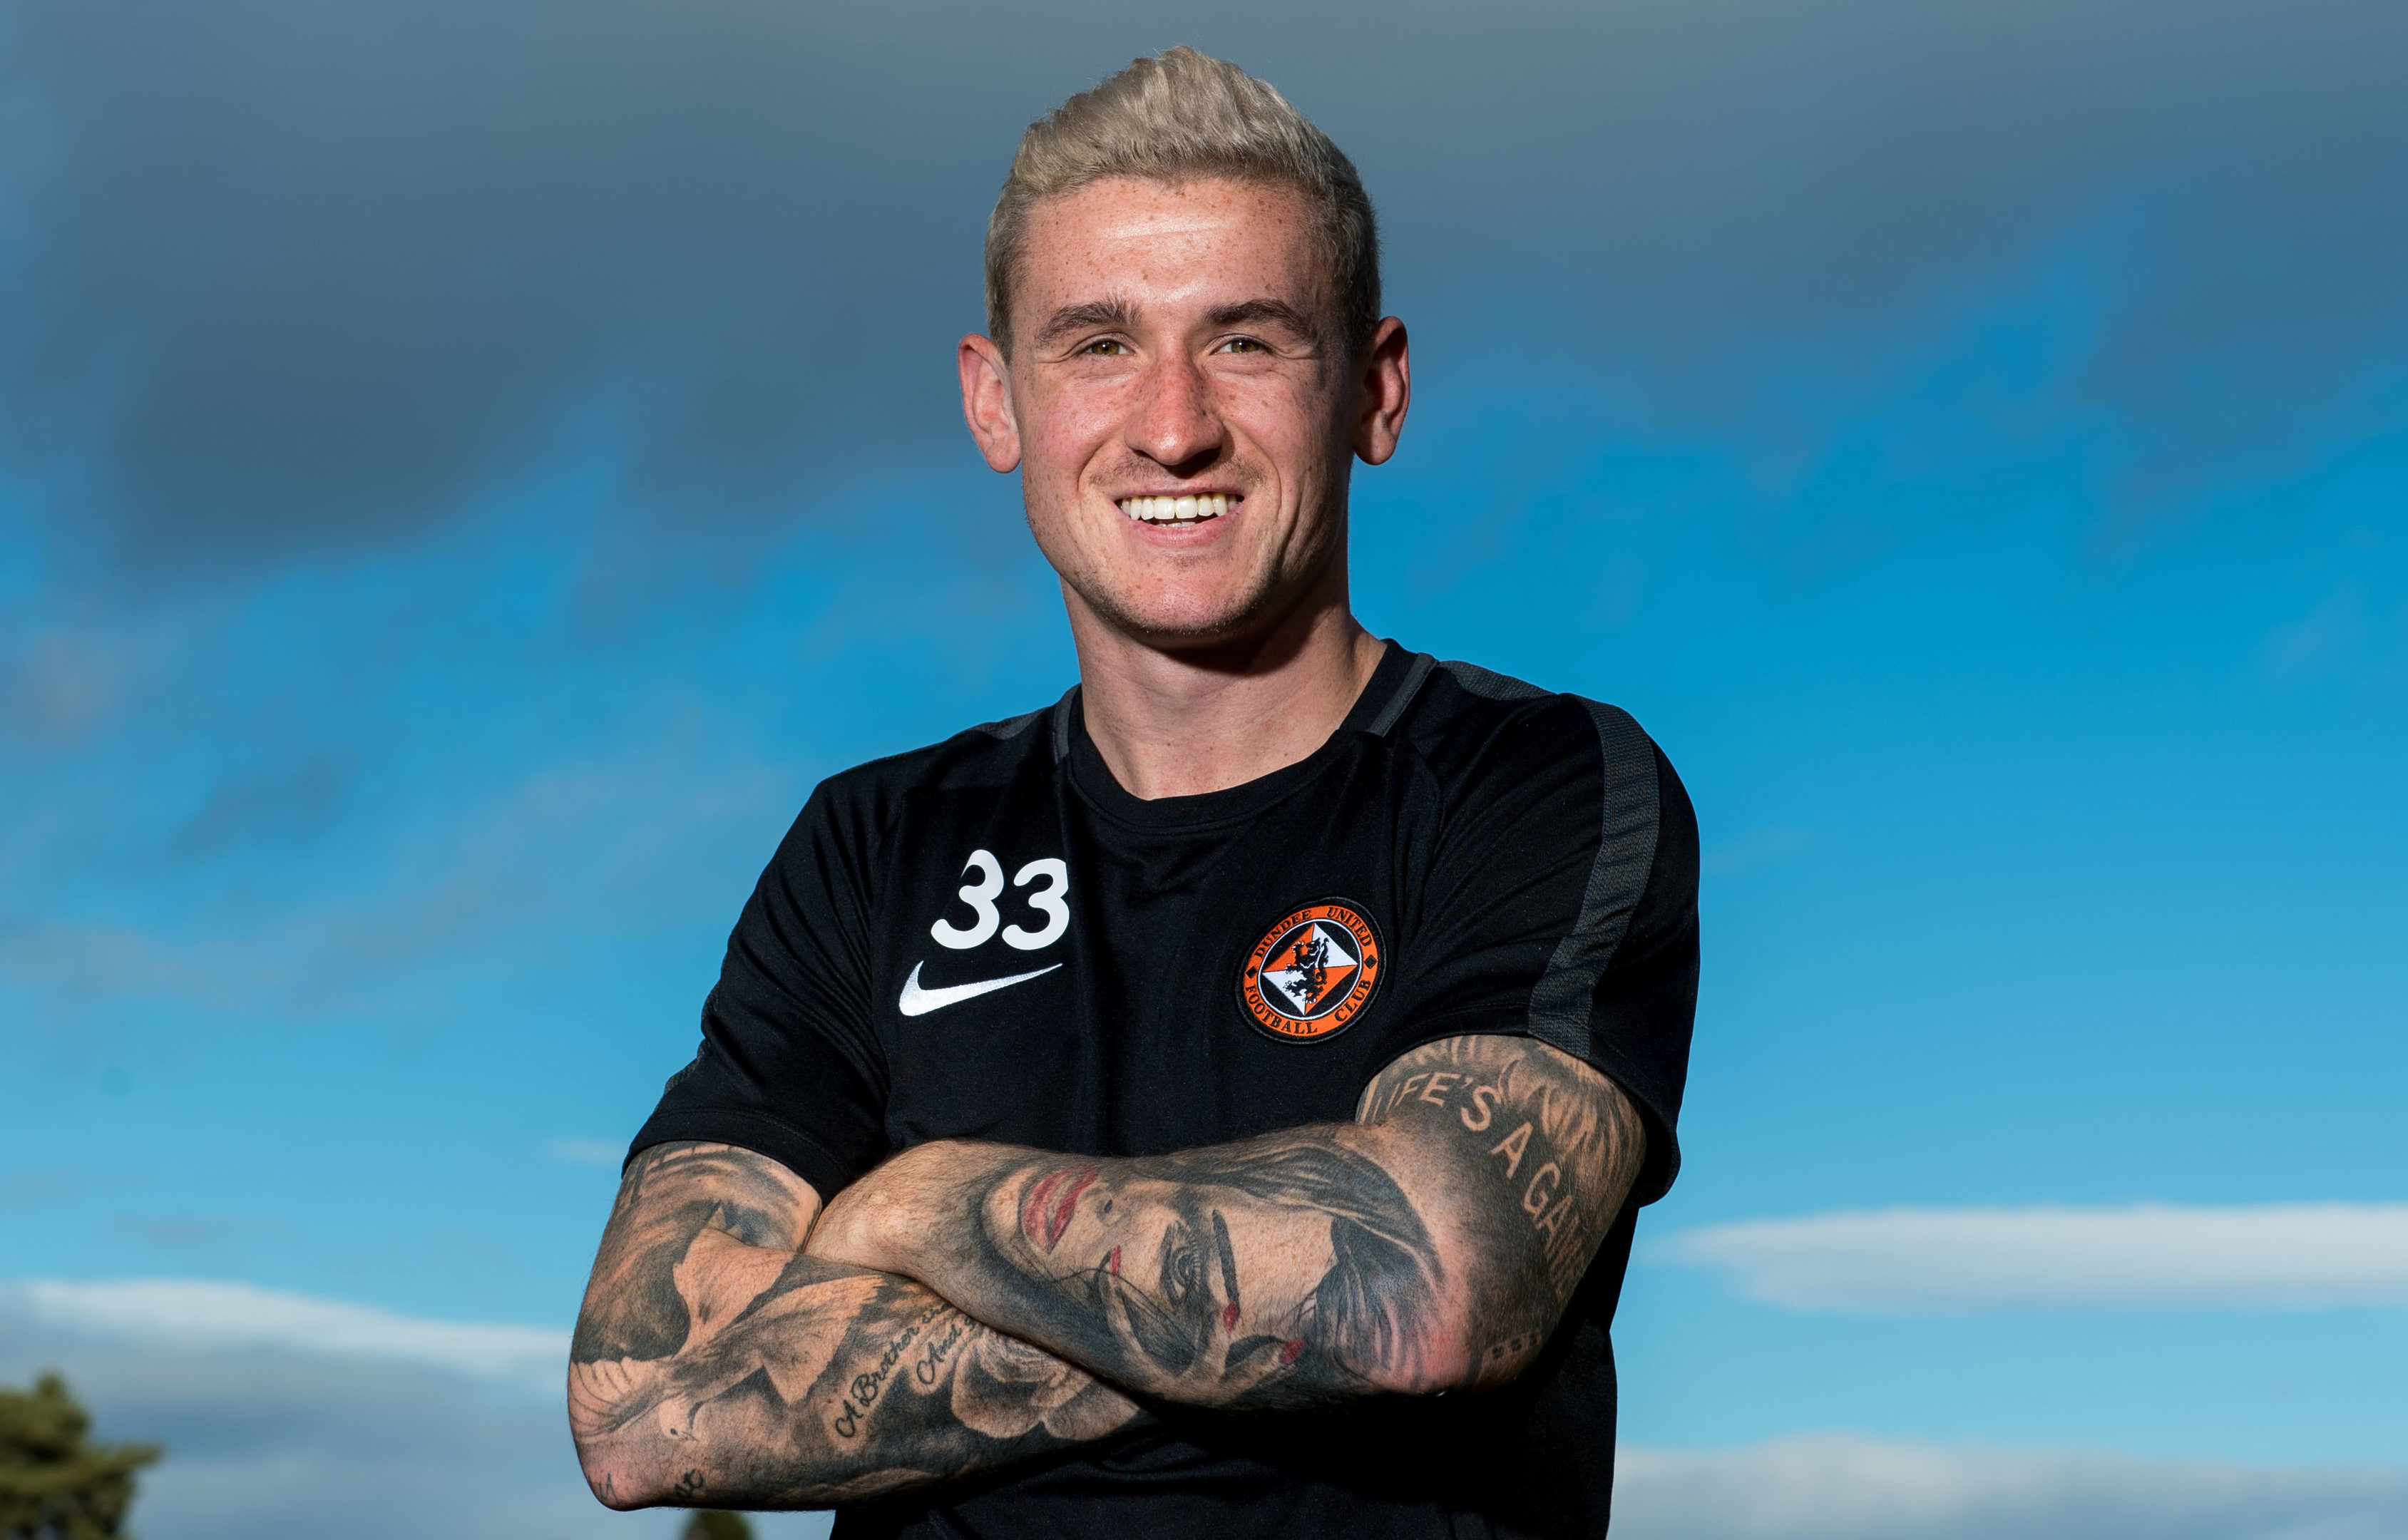 Fraser Aird with his new hairstyle.